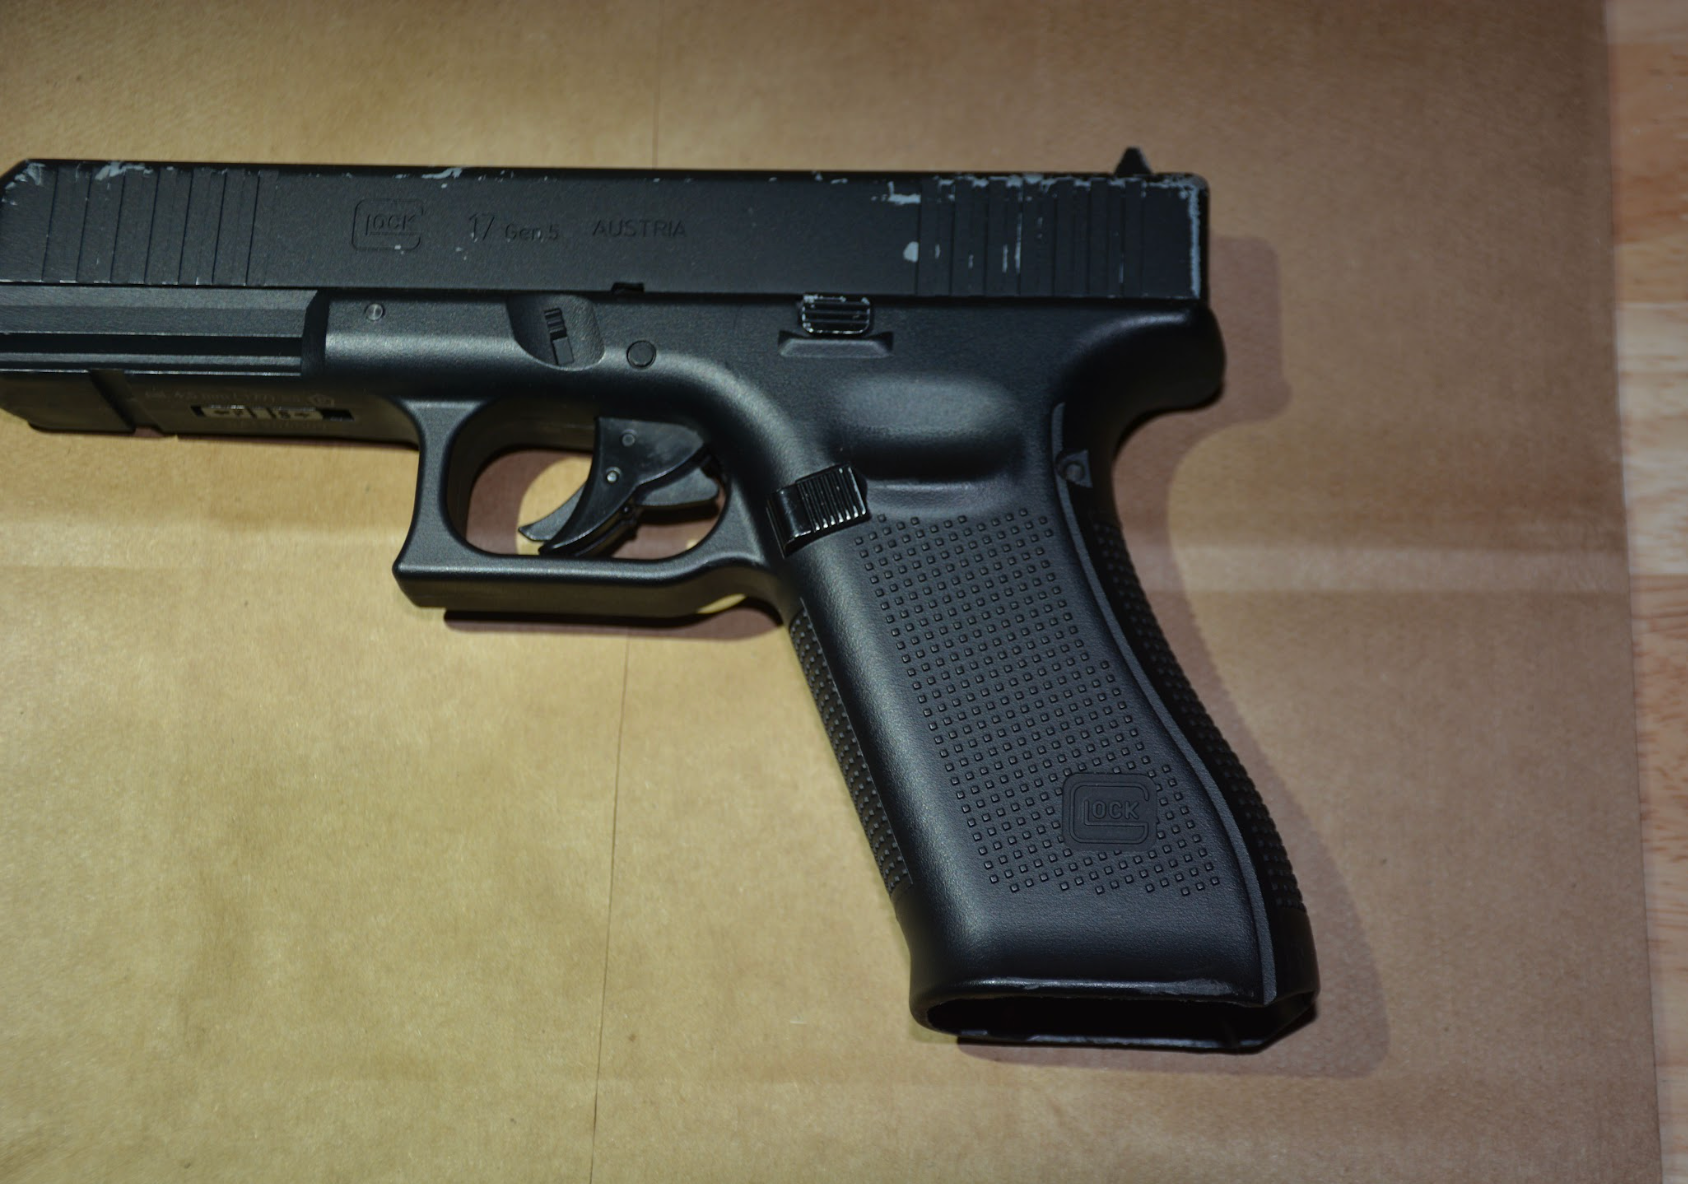 The replica handgun police recovered from the scene